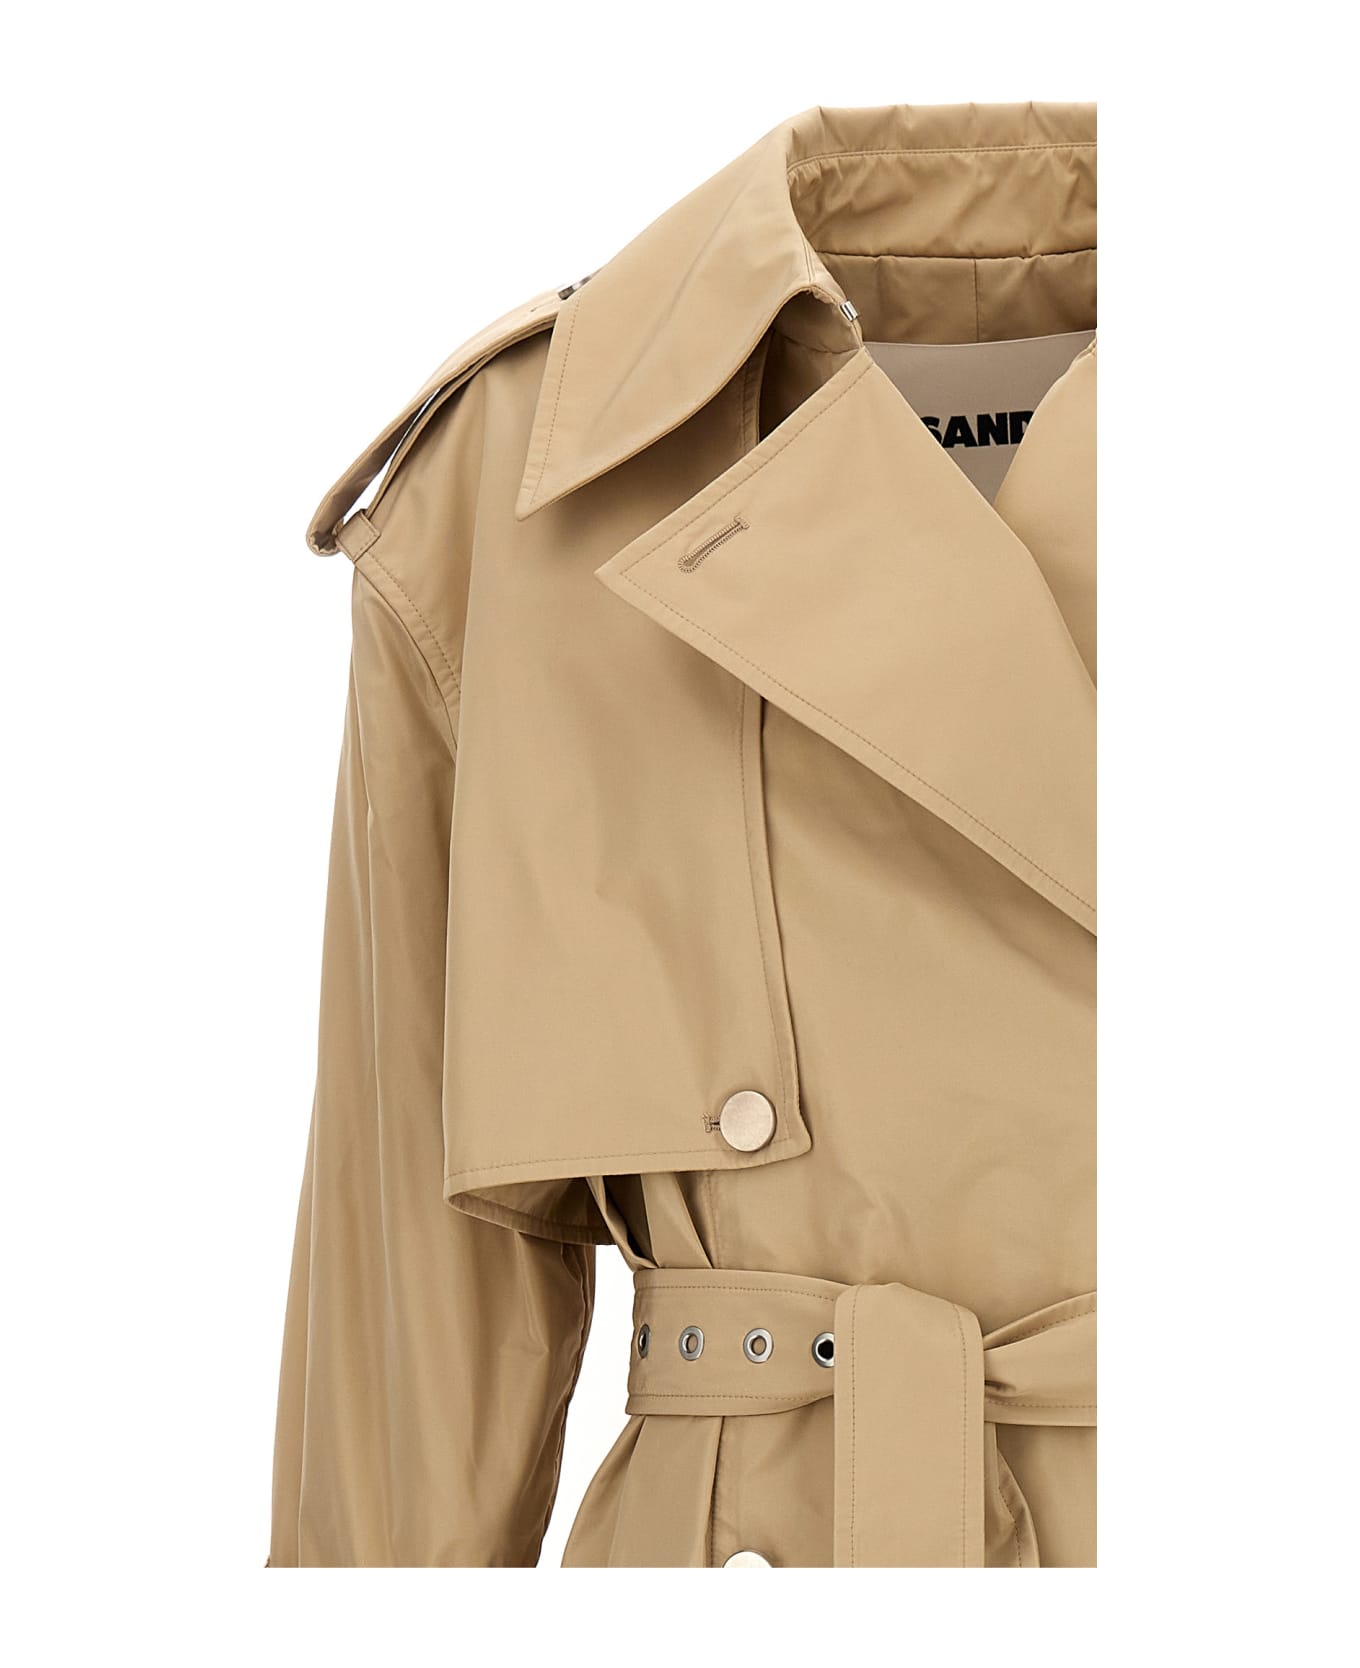 Jil Sander Oversize Double-breasted Trench Coat - Beige コート